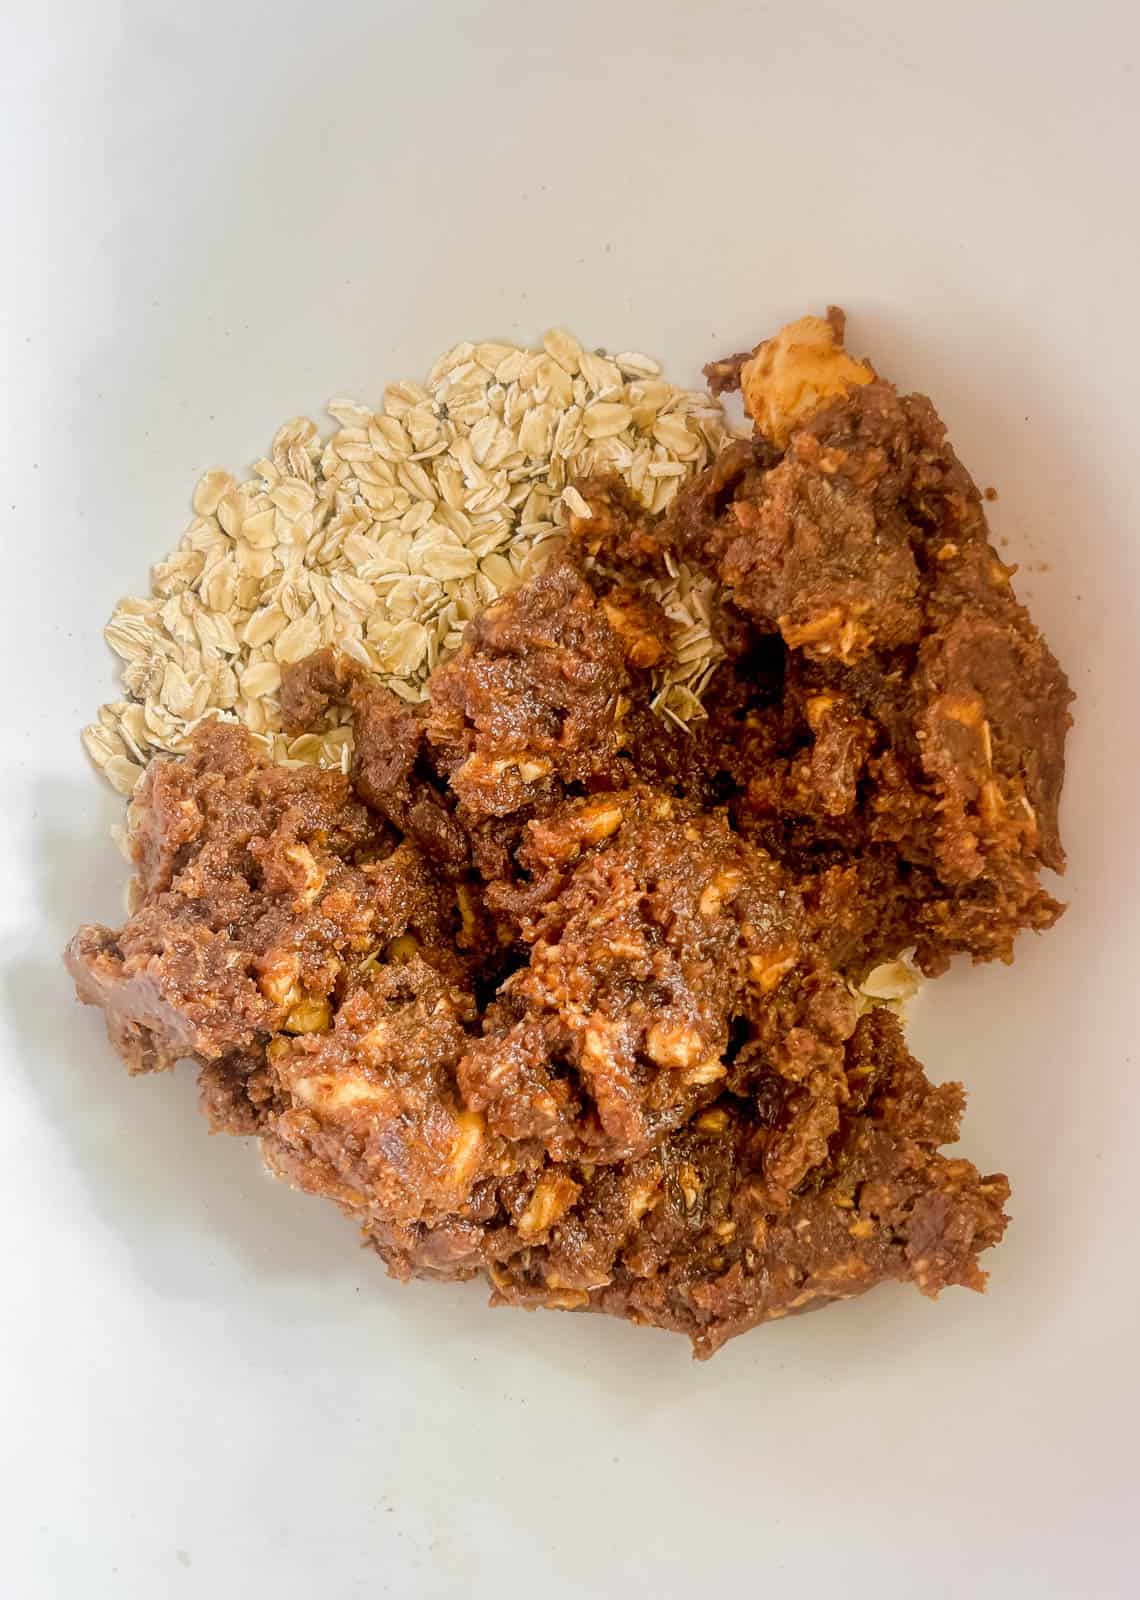 Date paste on top of rolled oats.